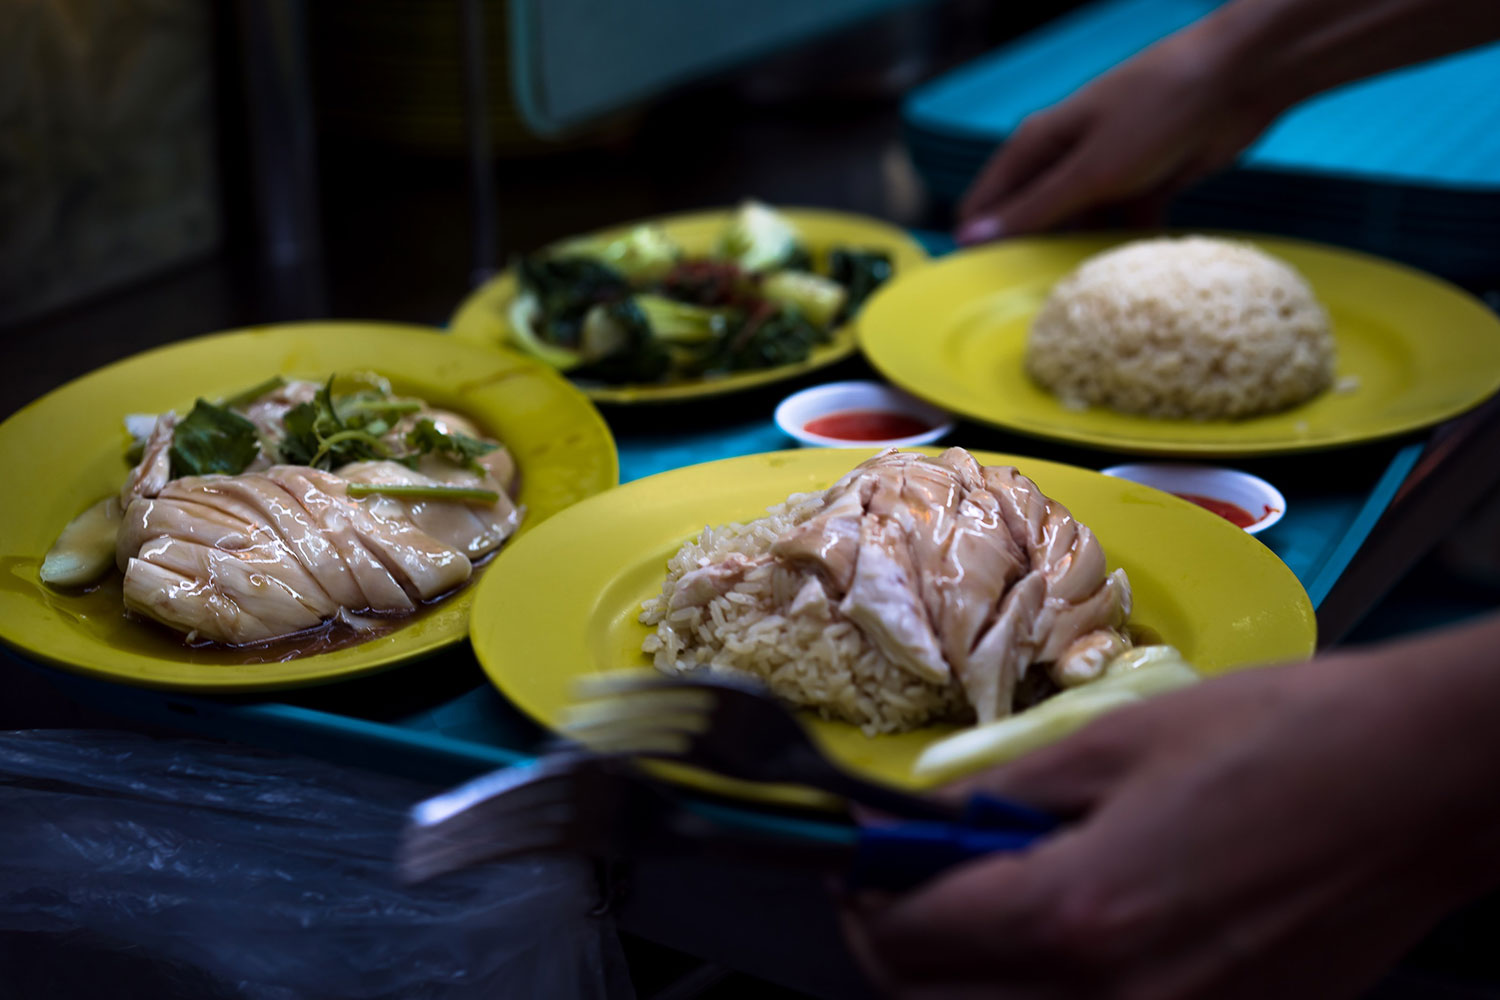 Chicken rice and other plated meals, Singapore food scene